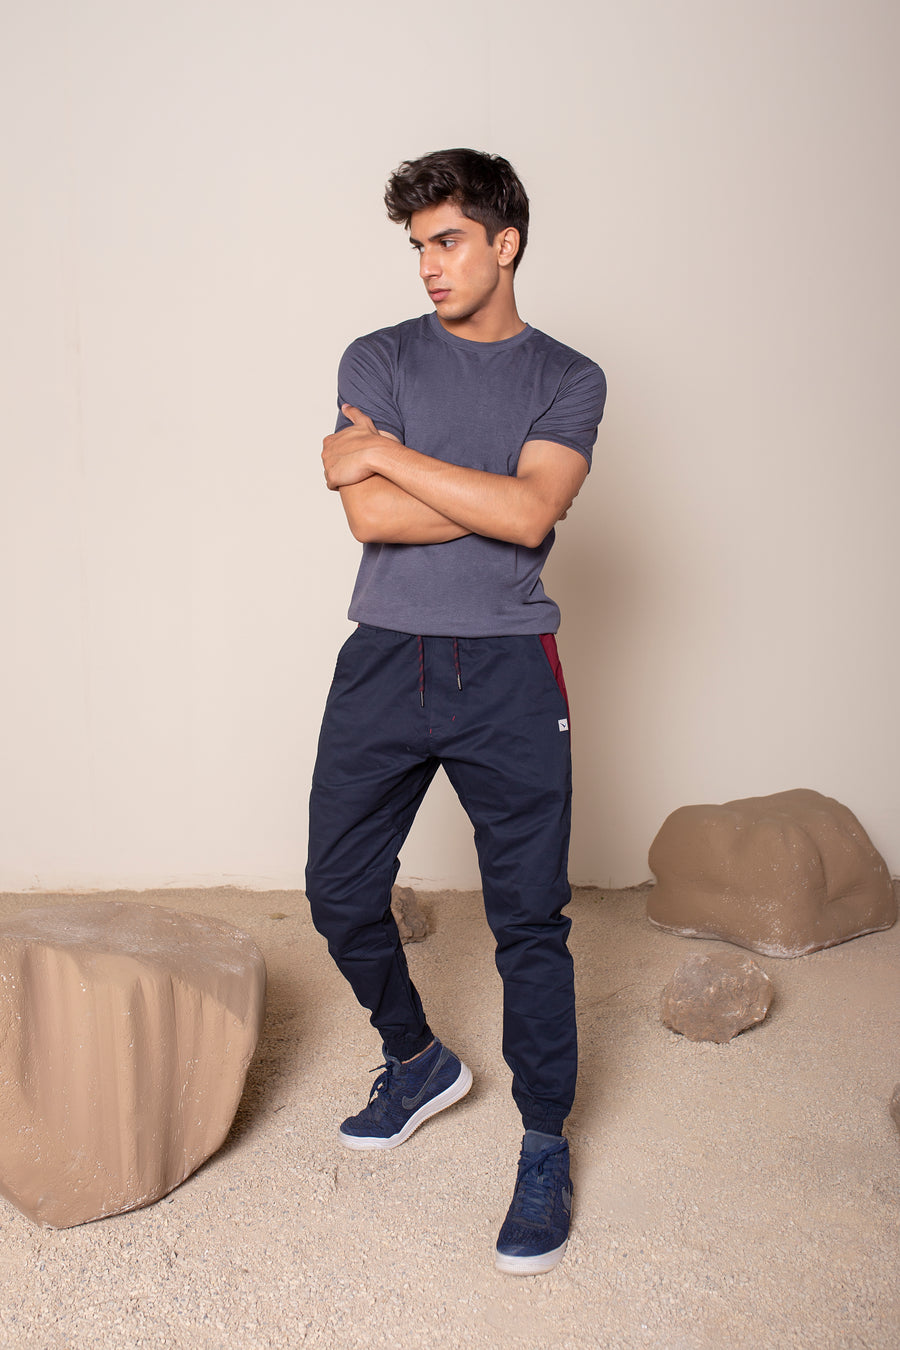 Men's Earth Joggers Navy Blue | VOLO Apparel | Designed for you to rock climb, hike, yoga, run or just chill. The most versatile athletic joggers that are fitted for your every daily life and all your athletic endeavors. The Earth Joggers comes with five pockets, features a 3 point gusset, 2 zipper pockets, snap buttons, tapered bottoms, and a breathable stretchy spandex cotton twill. With an internal drawstring and a tailored fit, these are gonna be your go to adventure joggers.